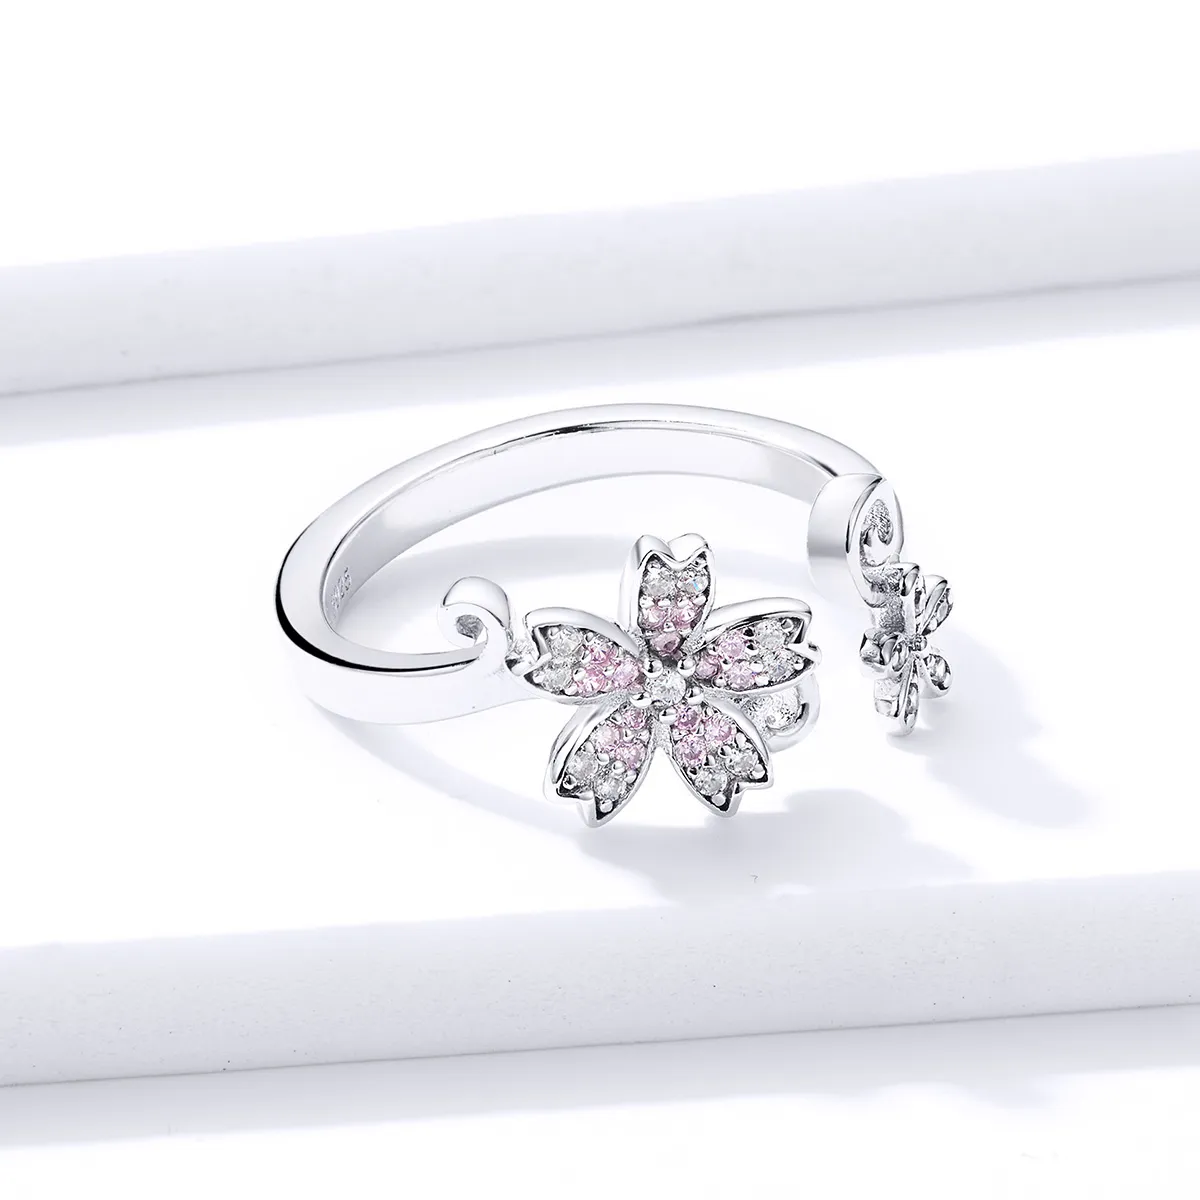 Pandora Style Silver Dazzling Daisy Open Ring - BSR086